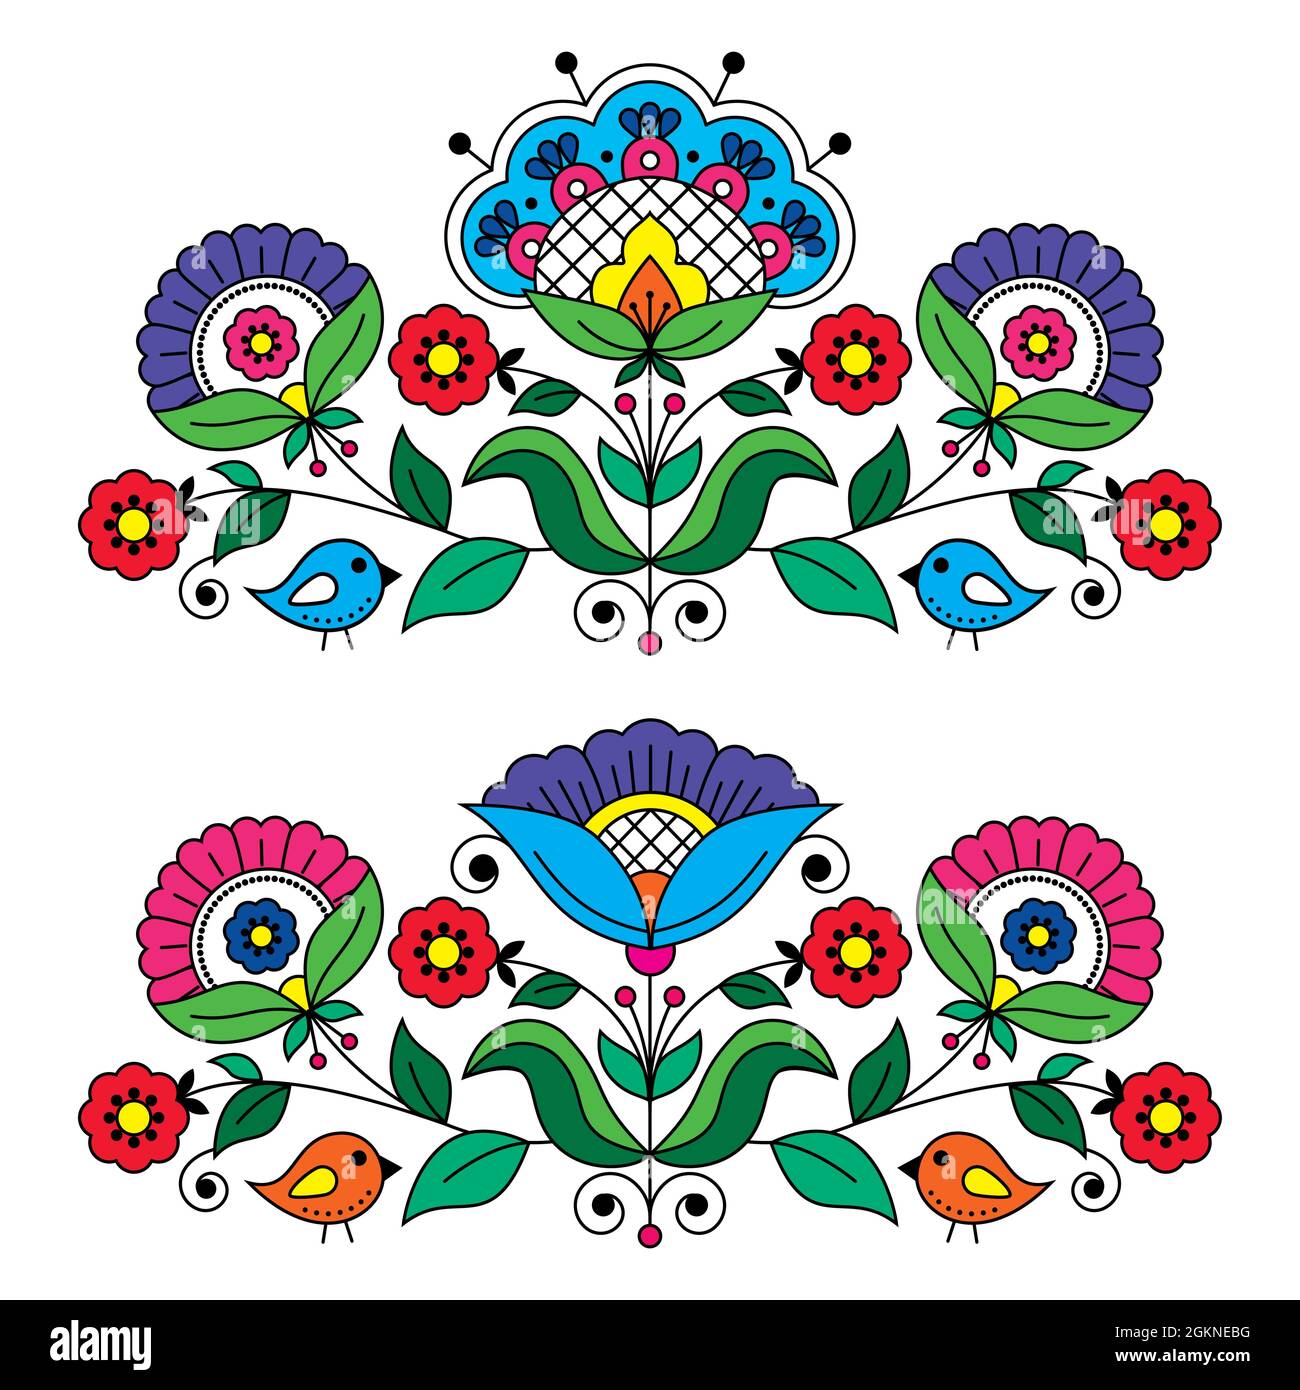 Swedish floral folk art vector greeting card design elements inspired by traditional Scandinavian embroidery patterns Stock Vector